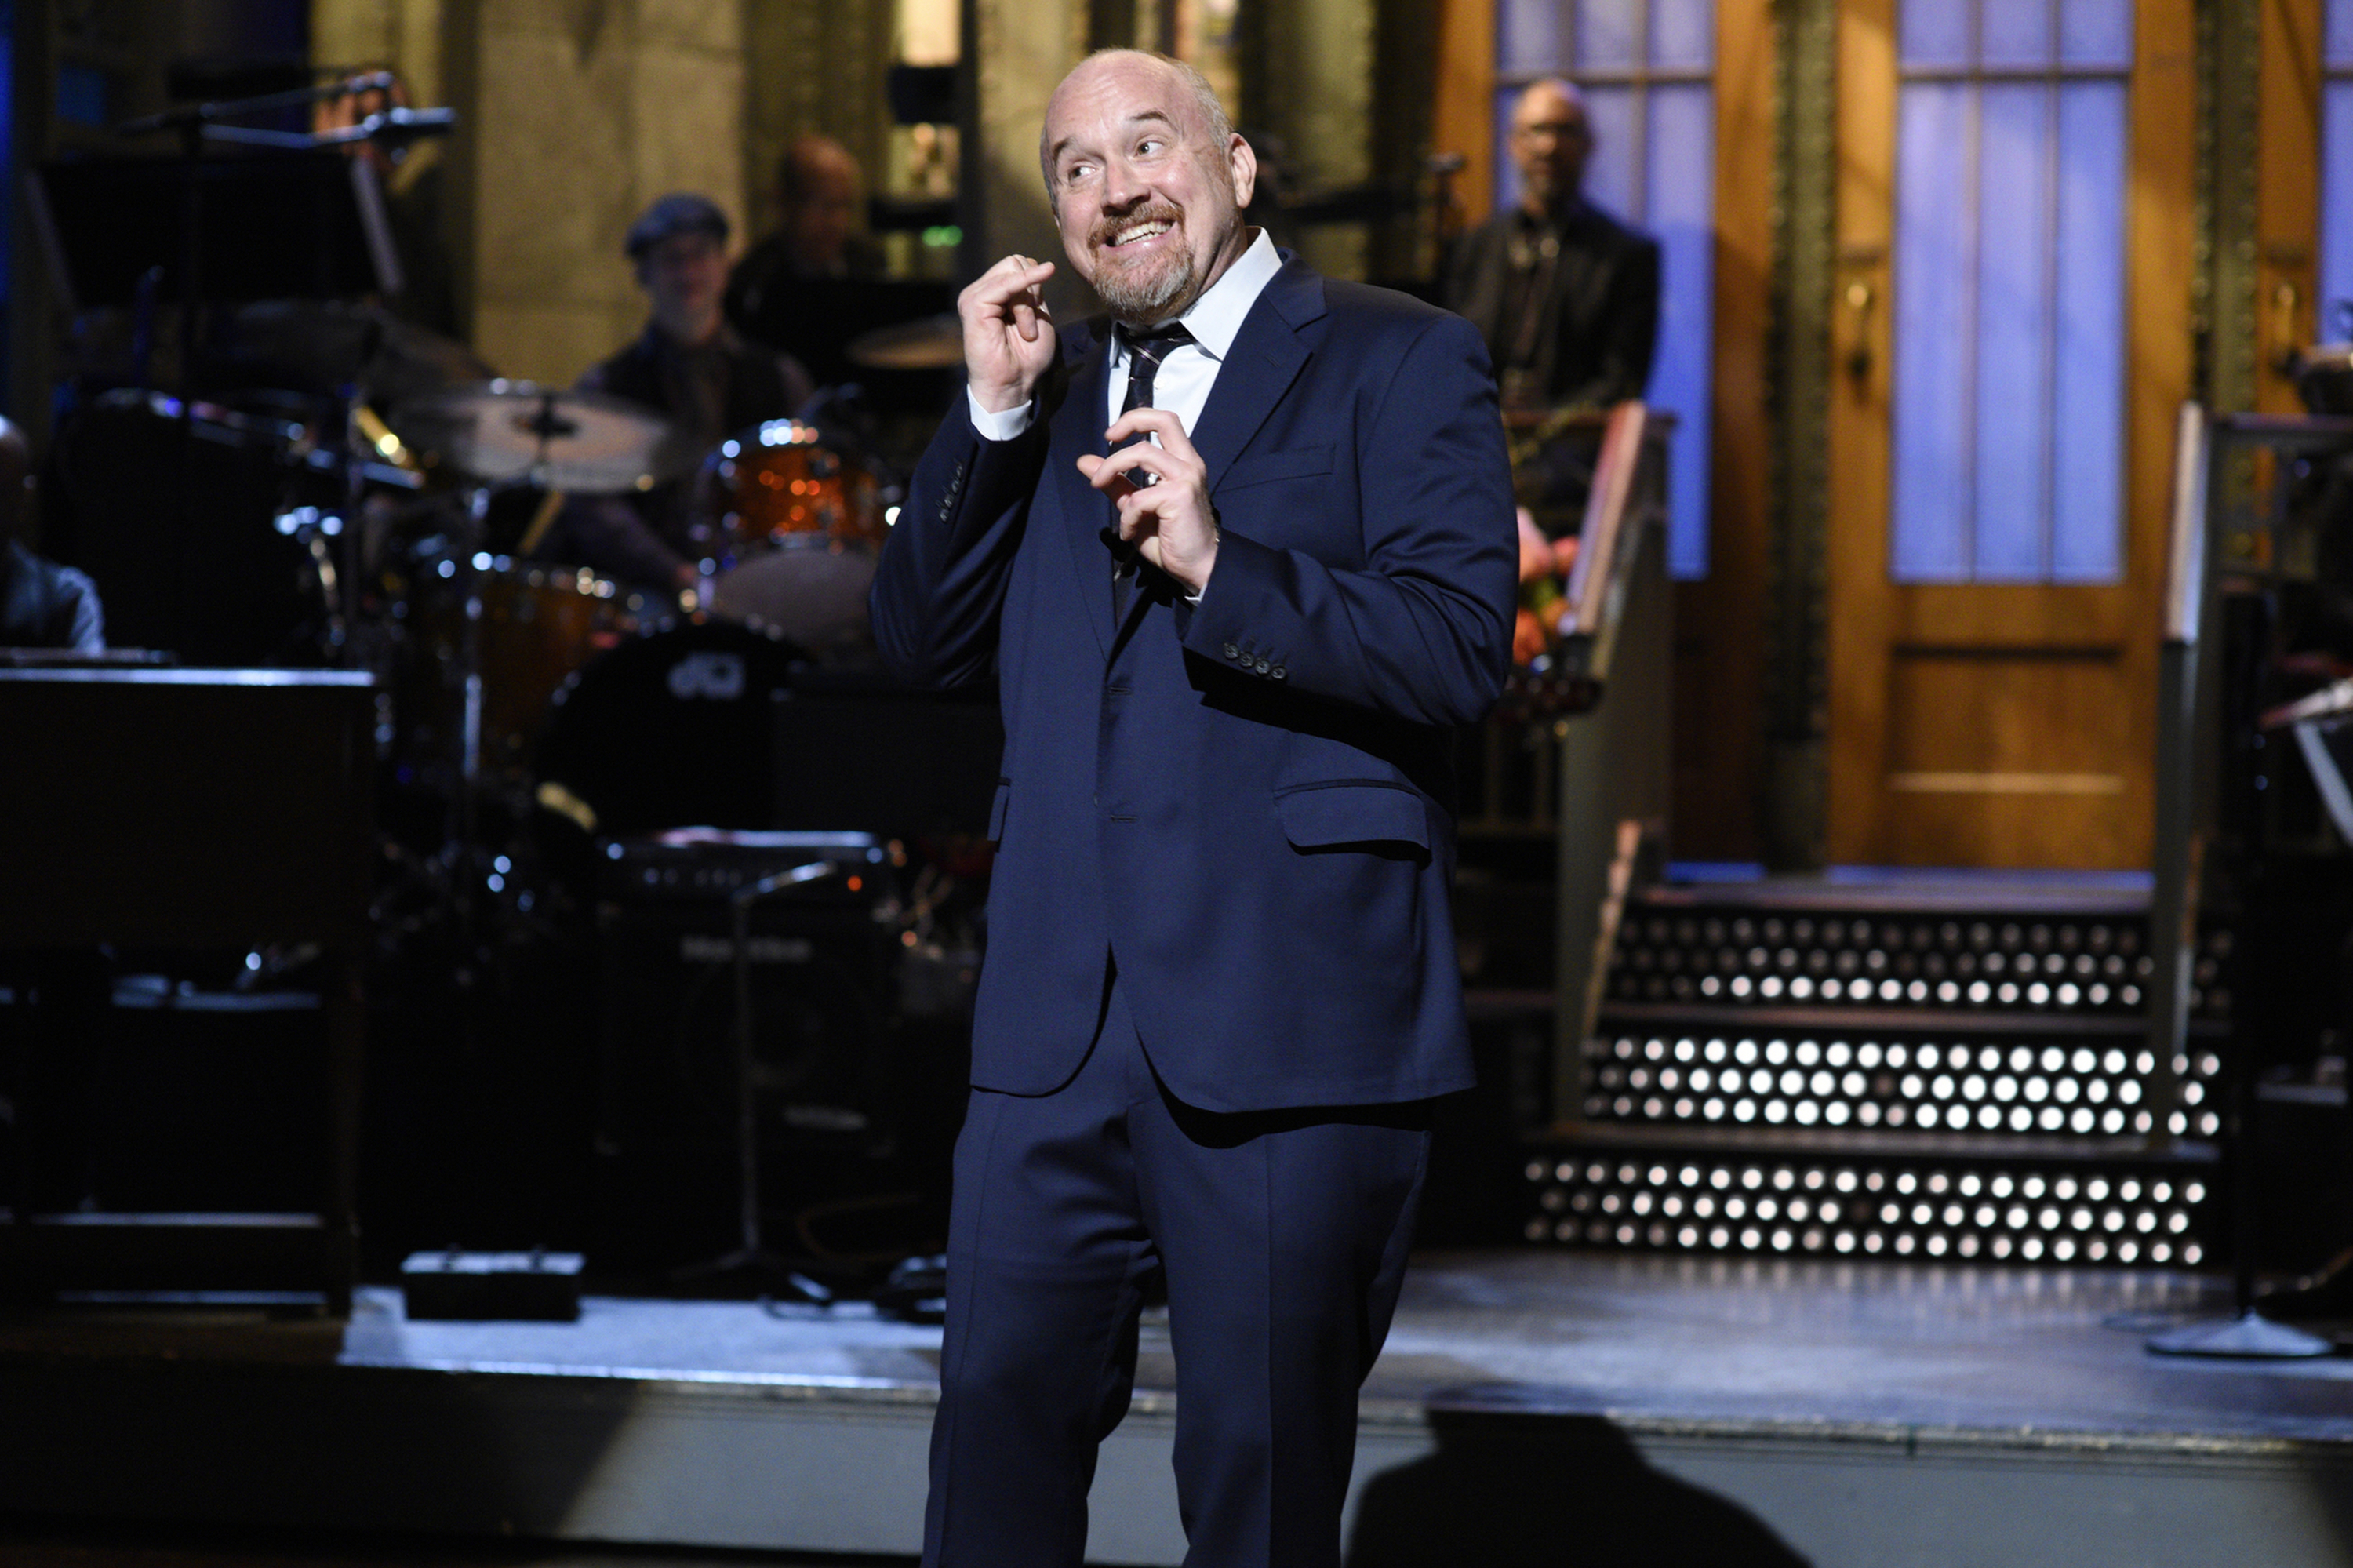 Louis C.K. performs his monologue on "Saturday Night Live" on April 8, 2017. | Source: Getty Images